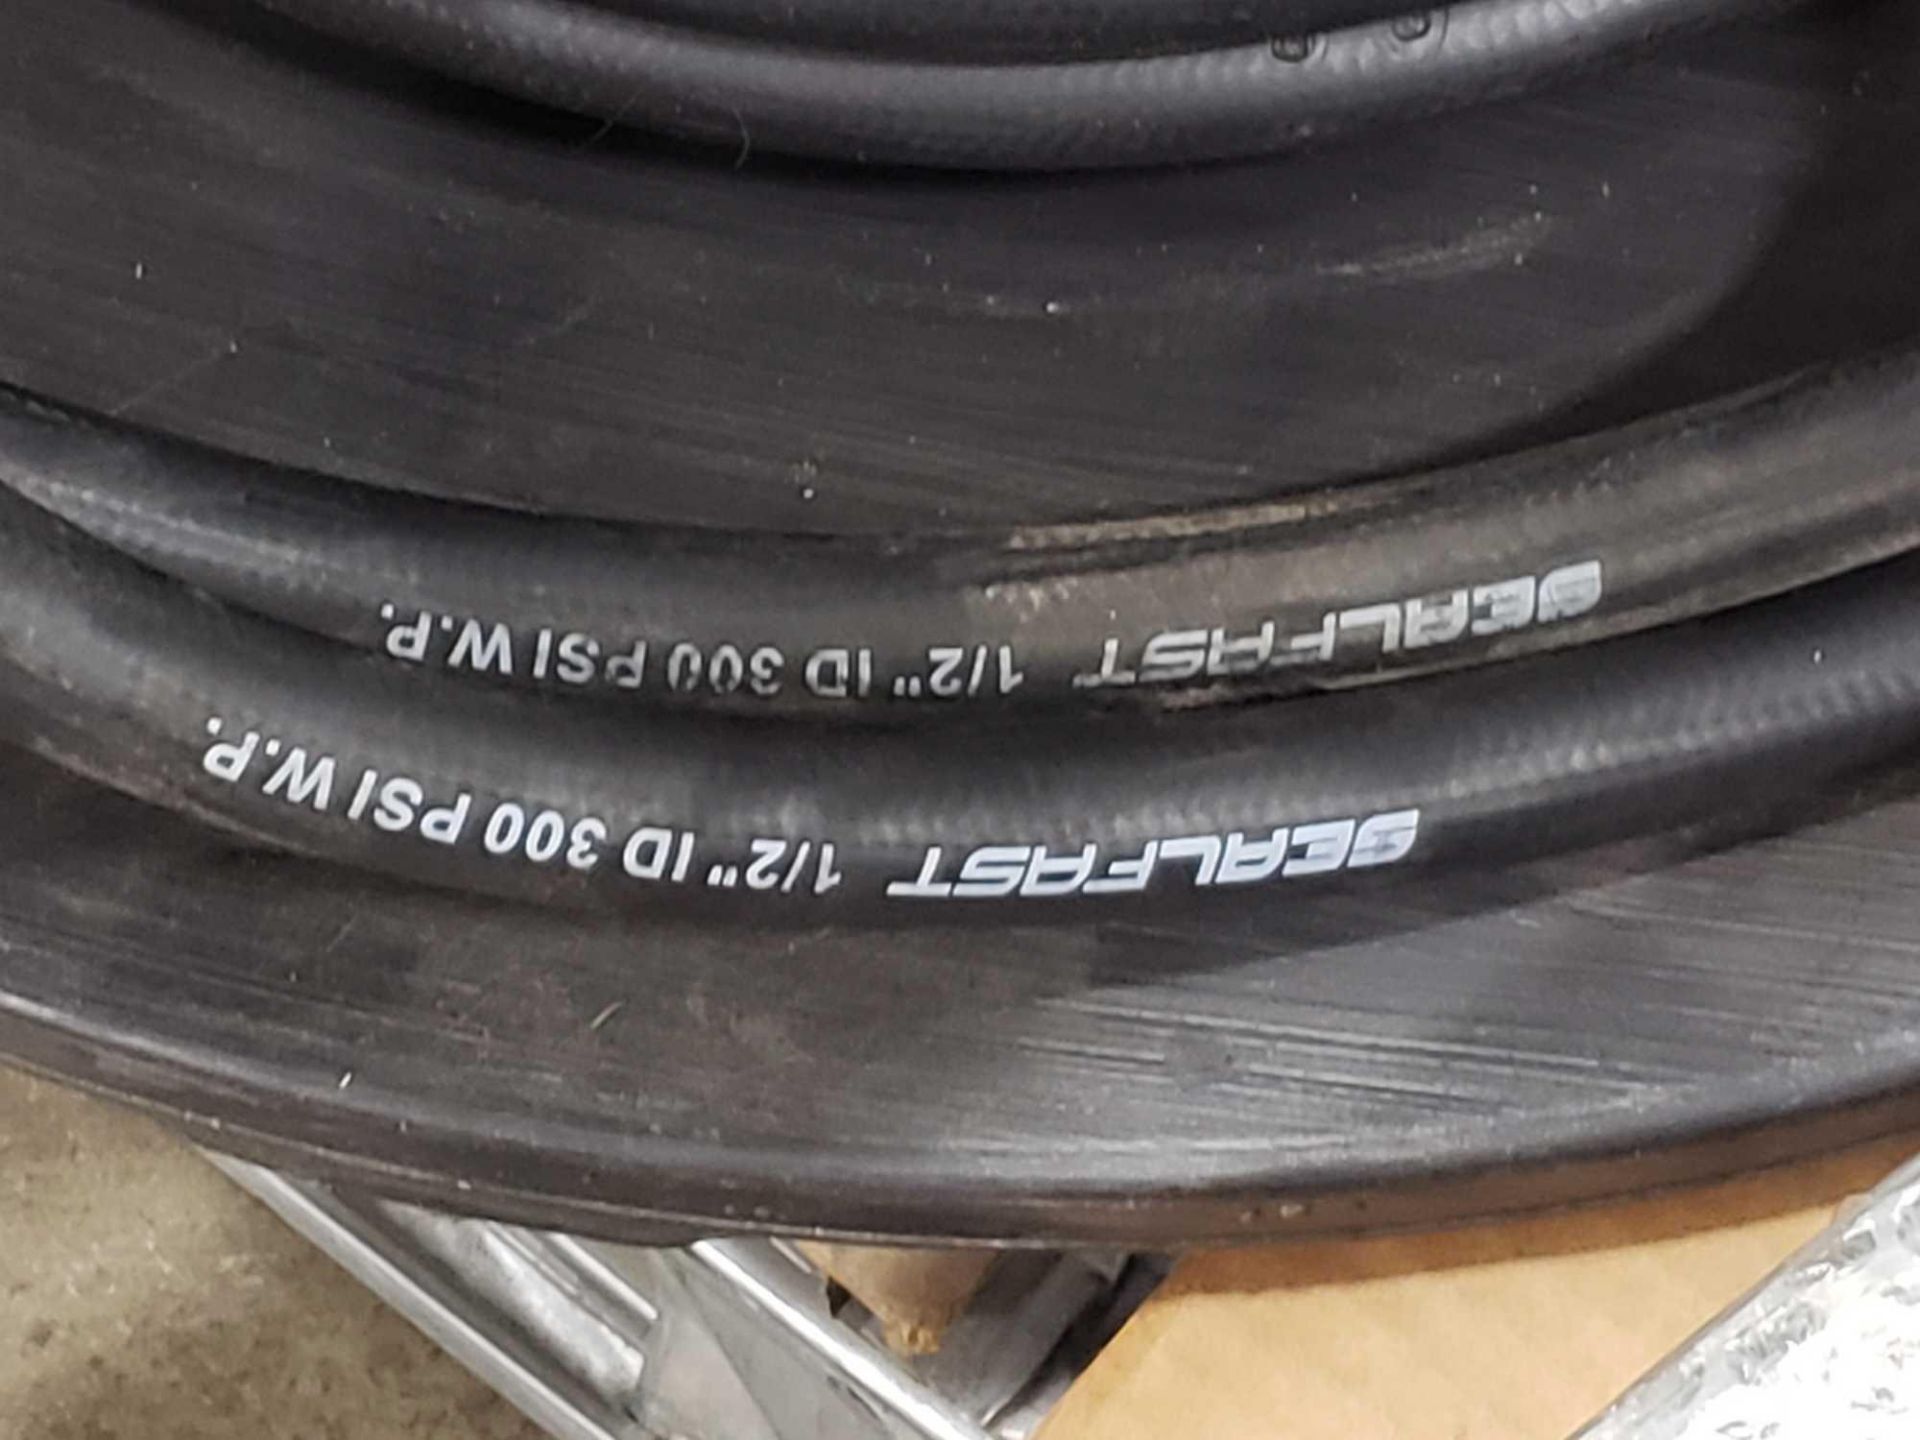 300psi Sealfast air and water hose 1/2"ID. New as pictured. - Image 2 of 2